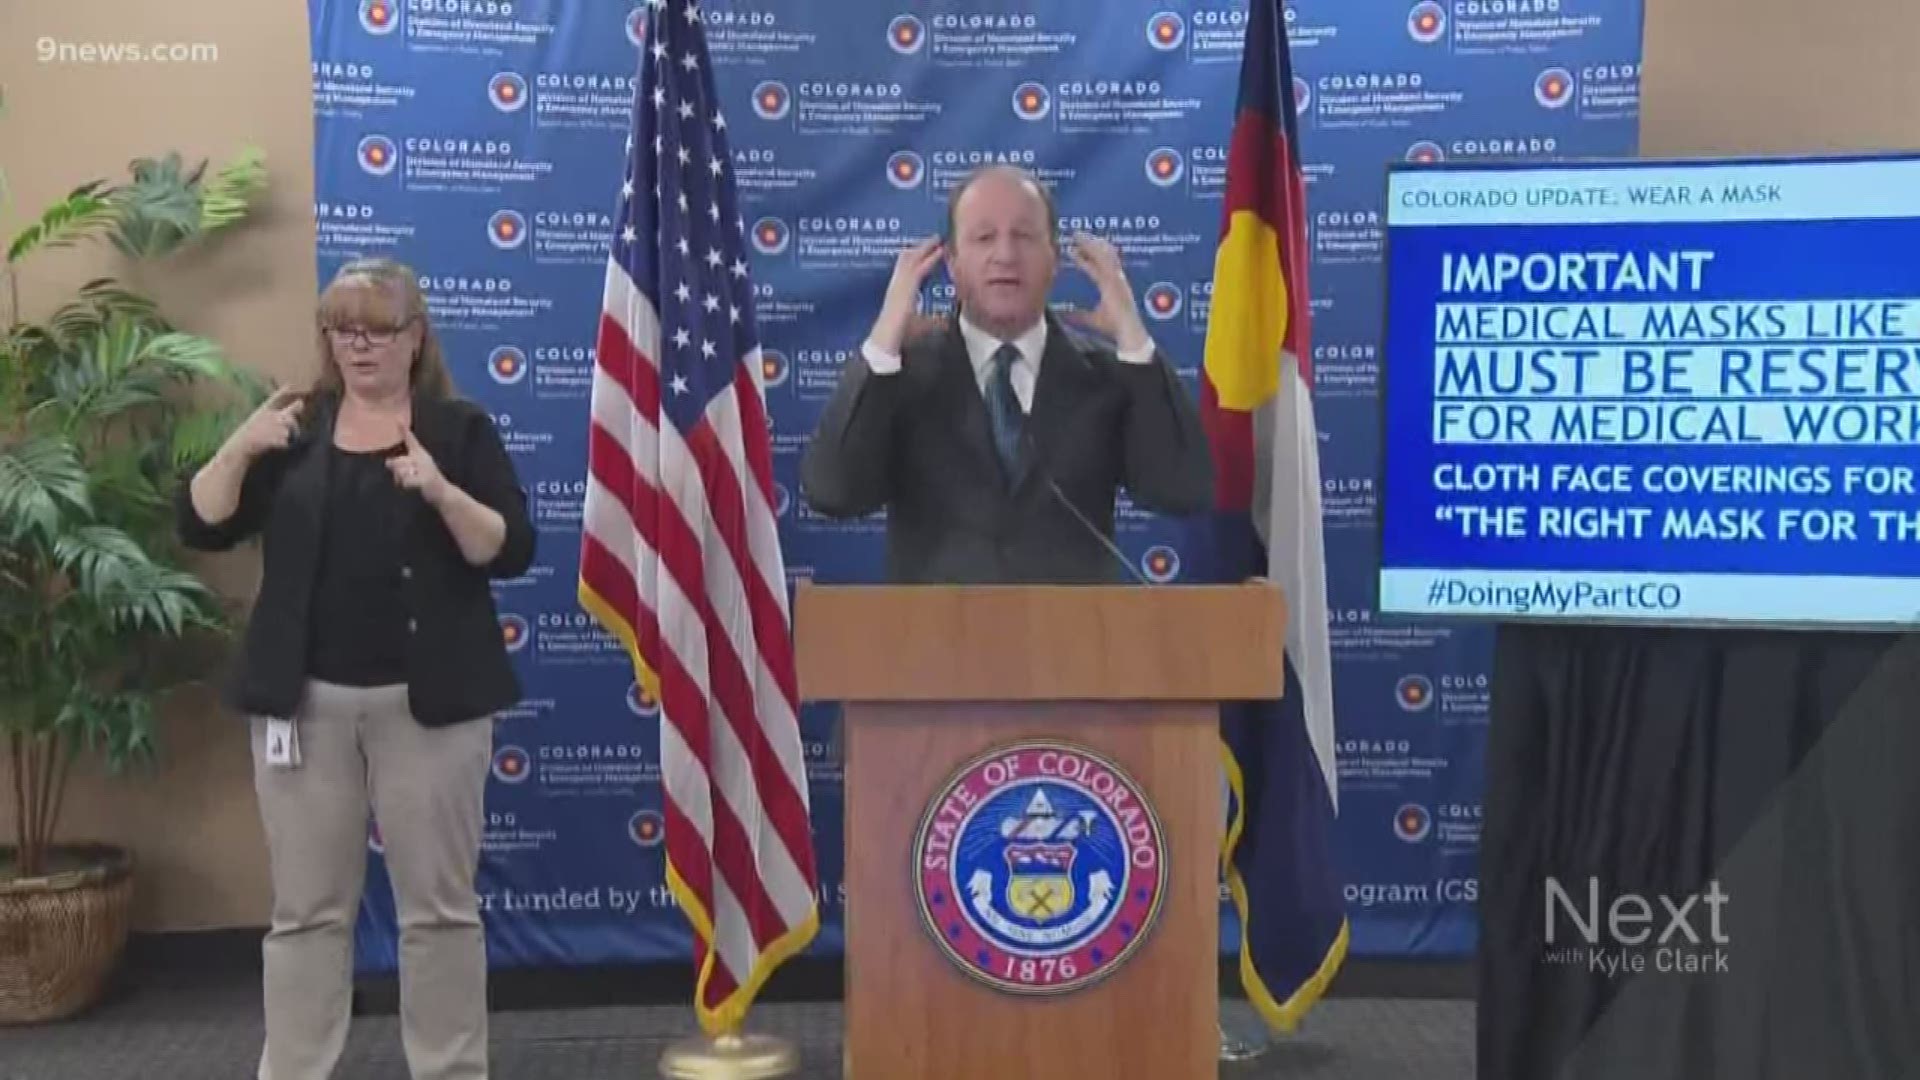 Right before federal health experts advised Americans to wear masks, Gov. Polis asked Colorado to do it. Let's discuss that.